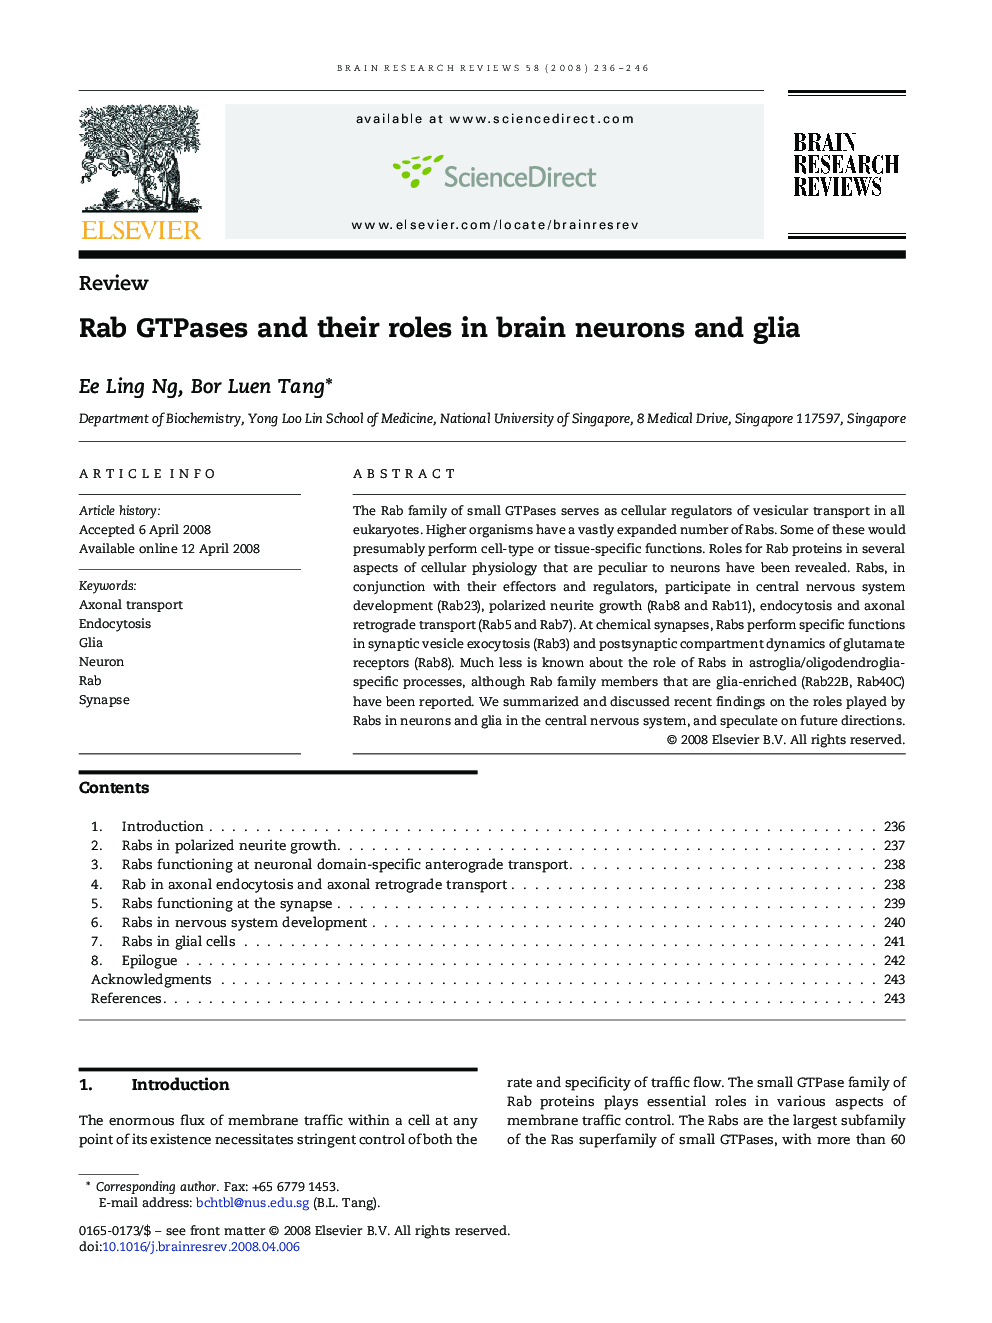 Rab GTPases and their roles in brain neurons and glia